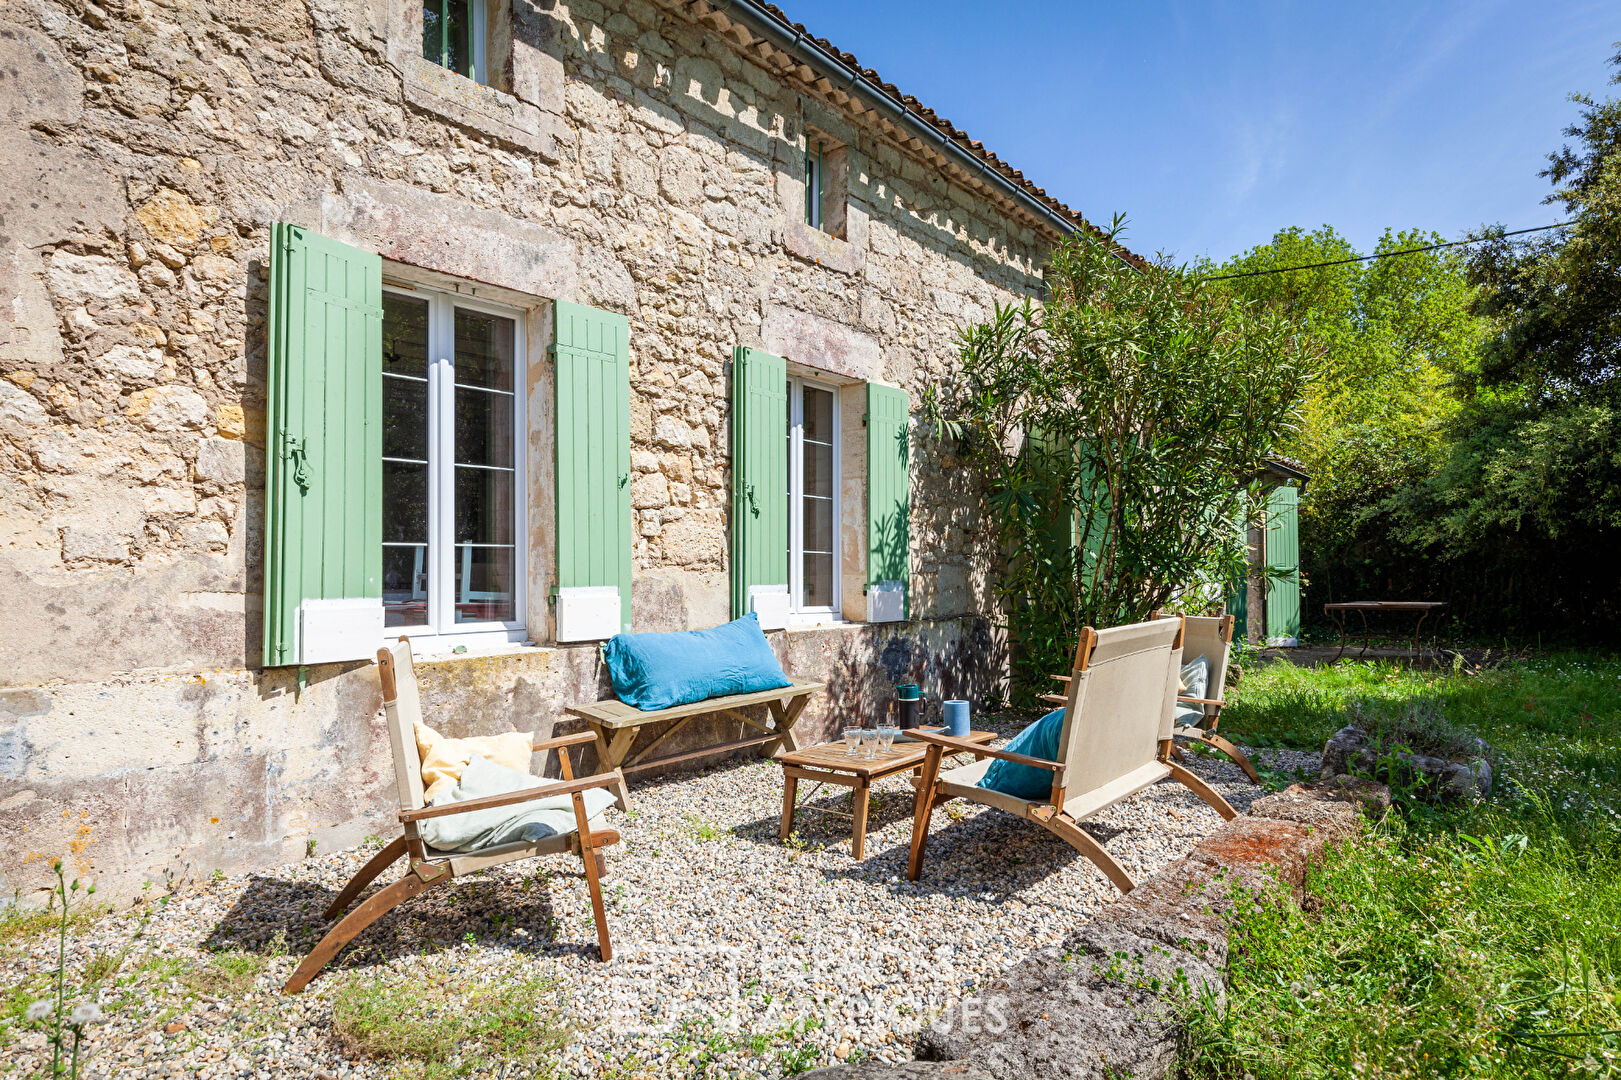 Médoc nestled in the middle of the vineyards – 140 sqm – Jau Dignac Et Loirac